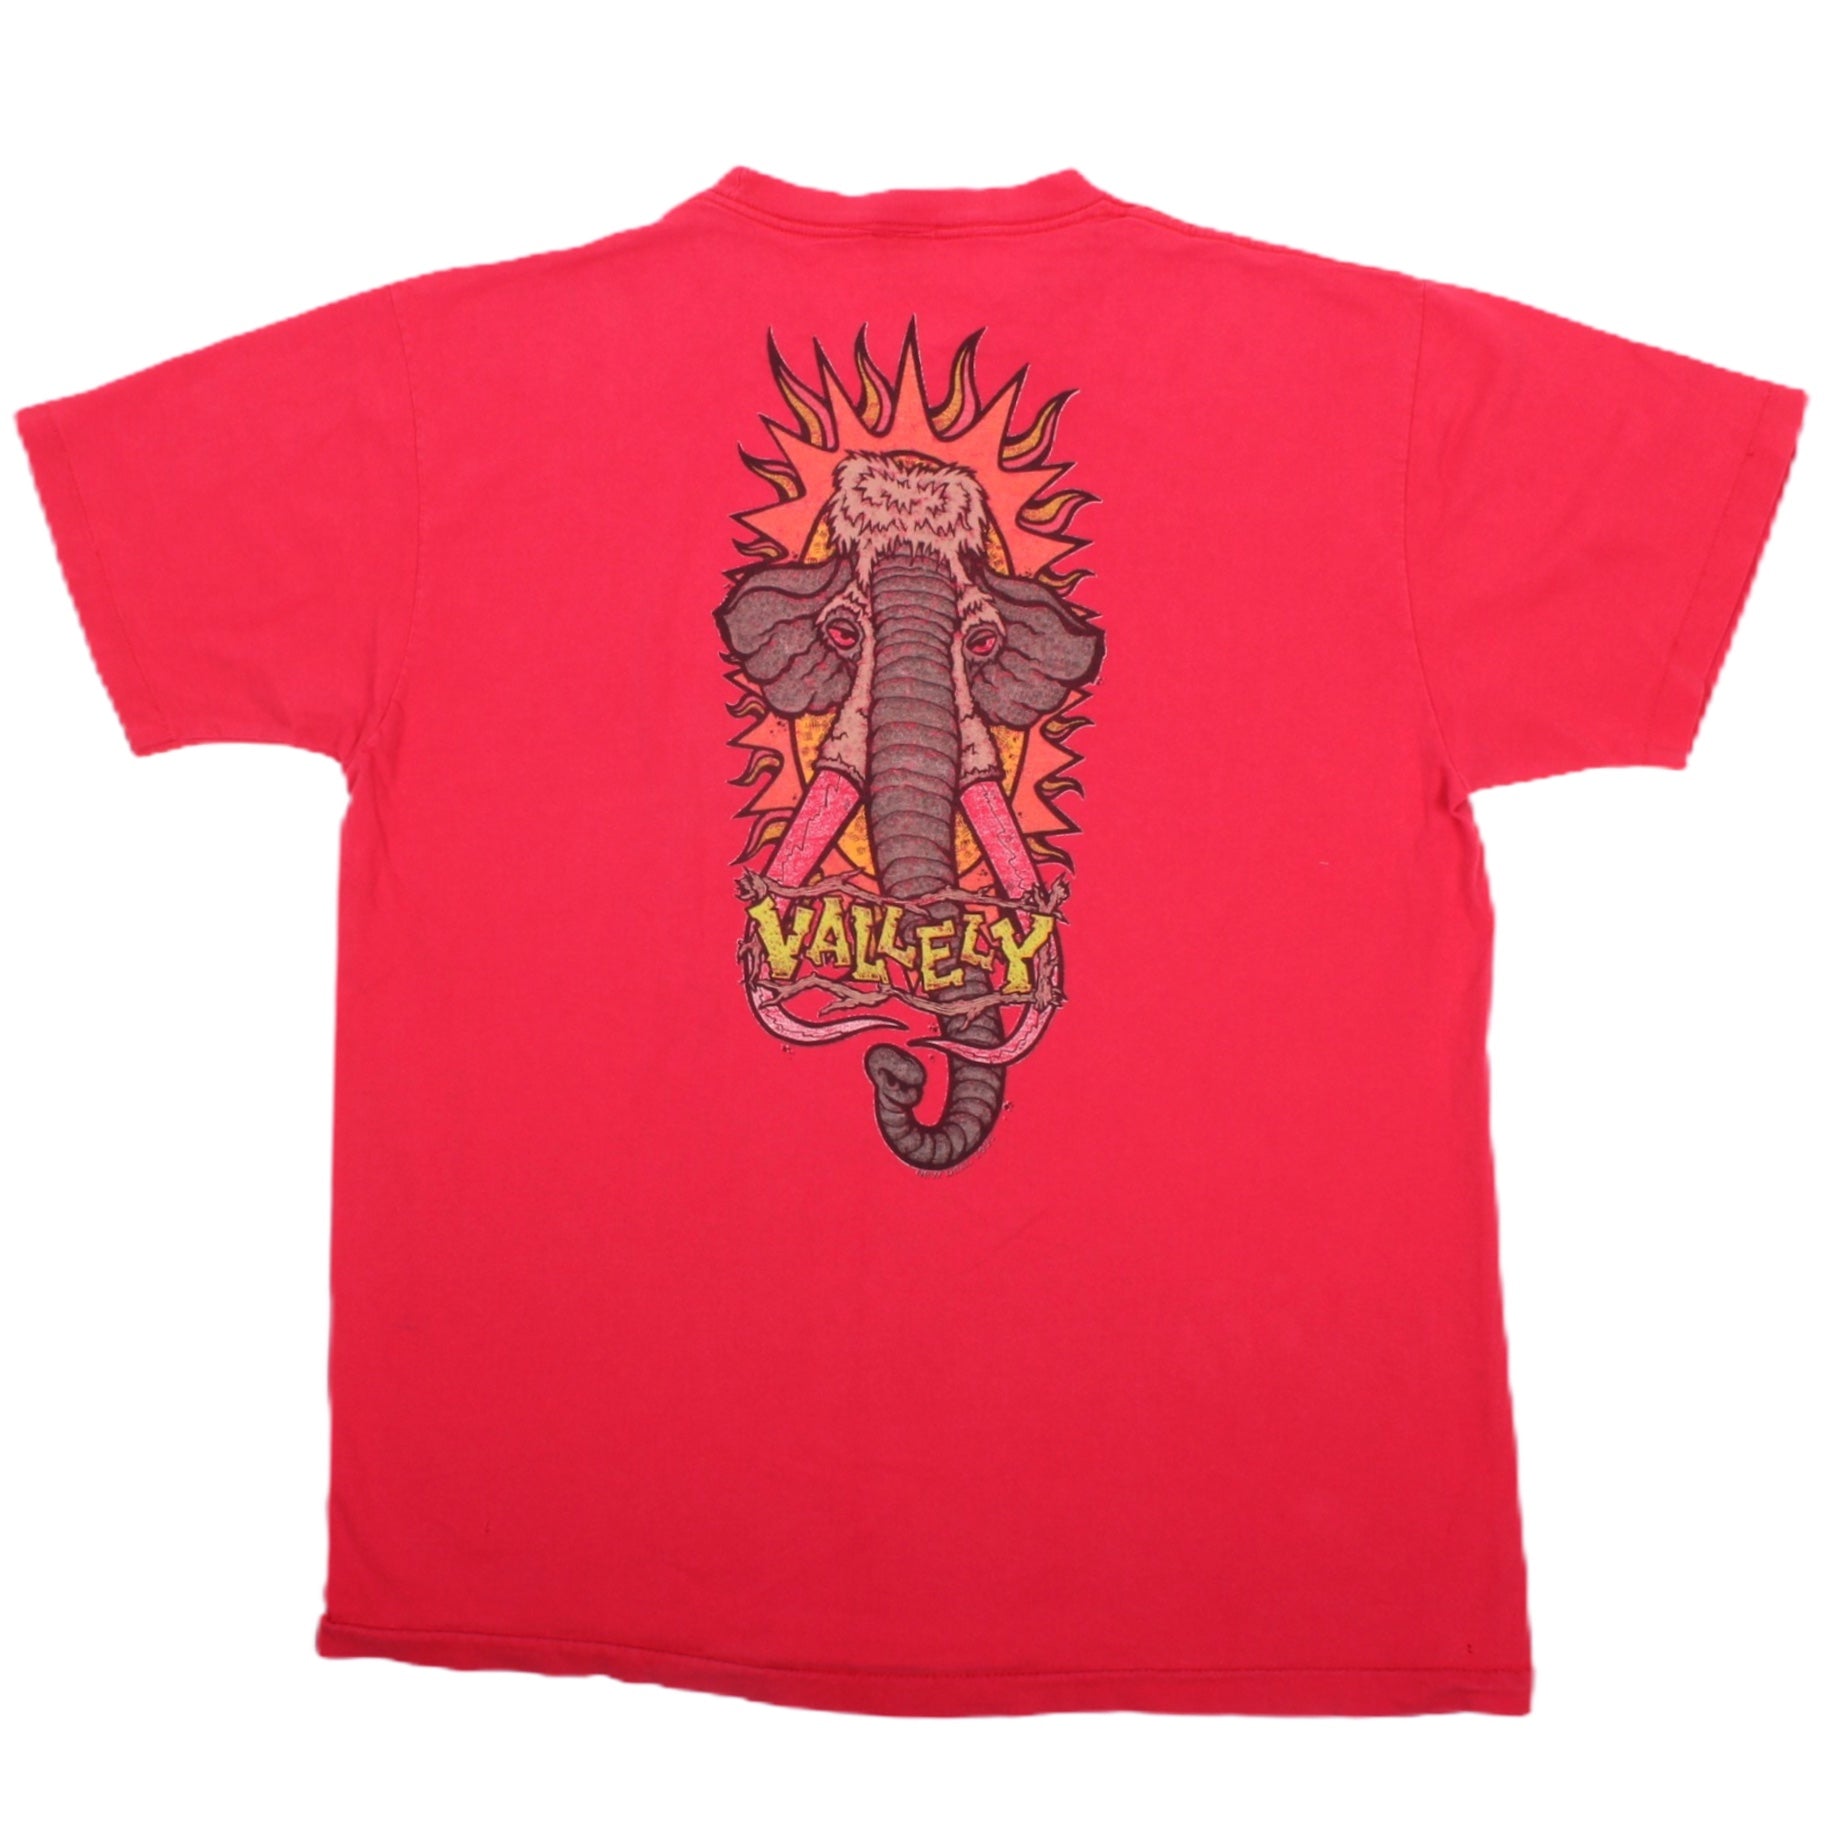 Overripe New Deal Tee Mike Vallely Elephant Solar Red XL (1991)